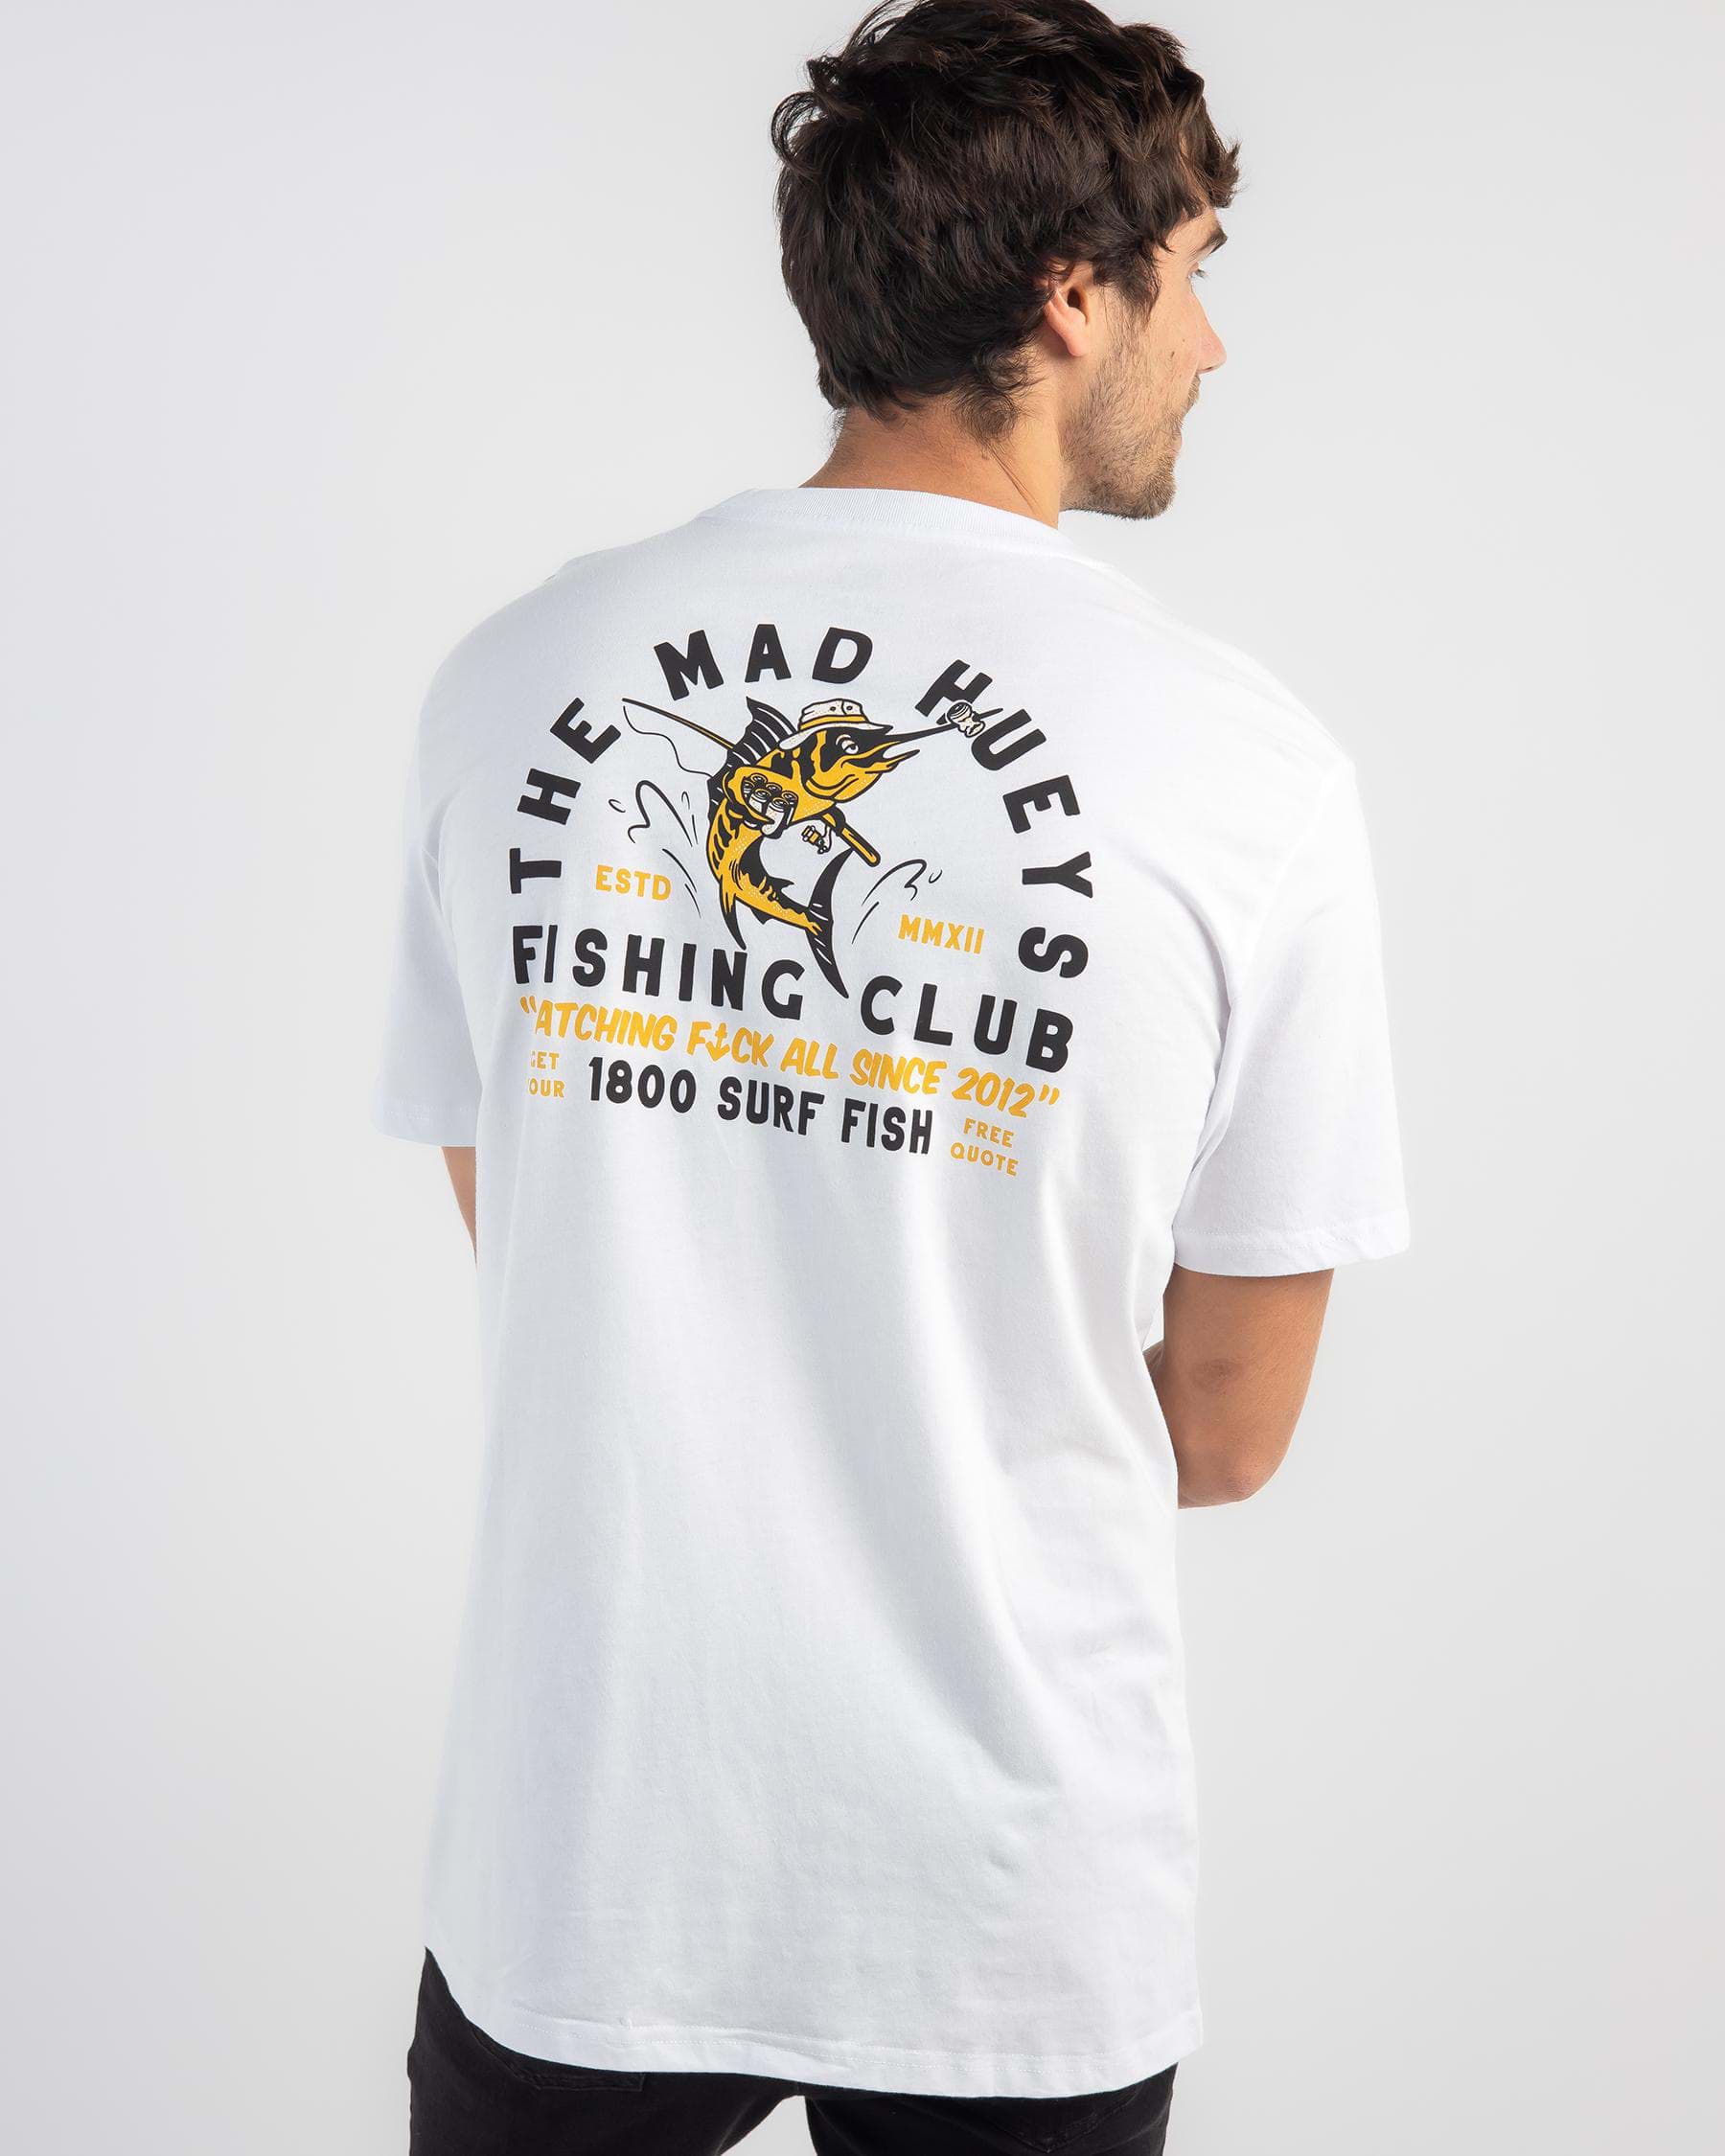 The Mad Hueys Fishing Club T-Shirt In White - FREE* Shipping & Easy Returns  - City Beach United States